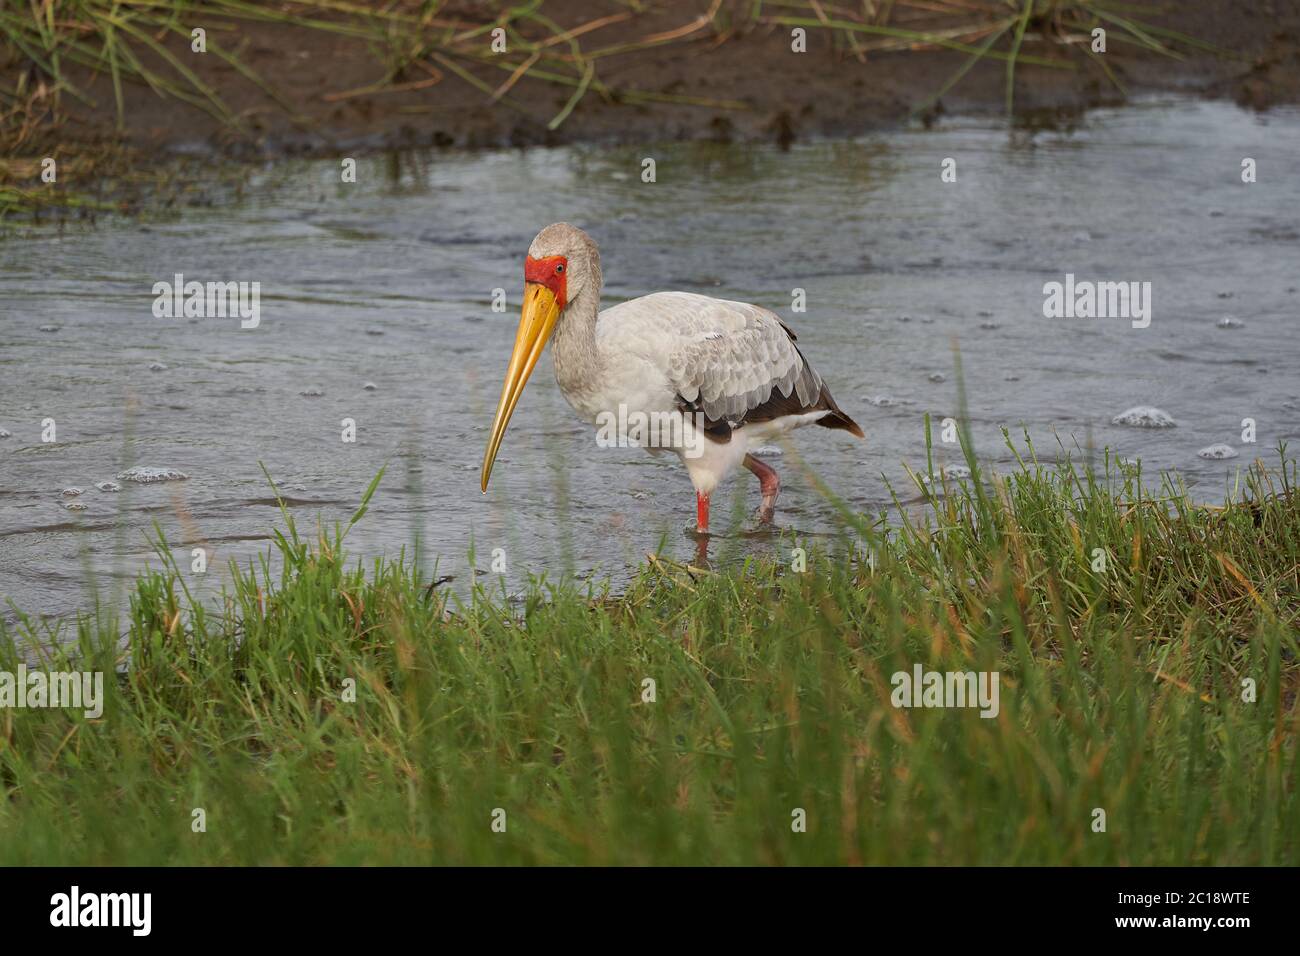 Yellow-billed stork Mycteria ibis also called wood stork or wood ibis arge African wading stork family Ciconiidae Portrait Stock Photo